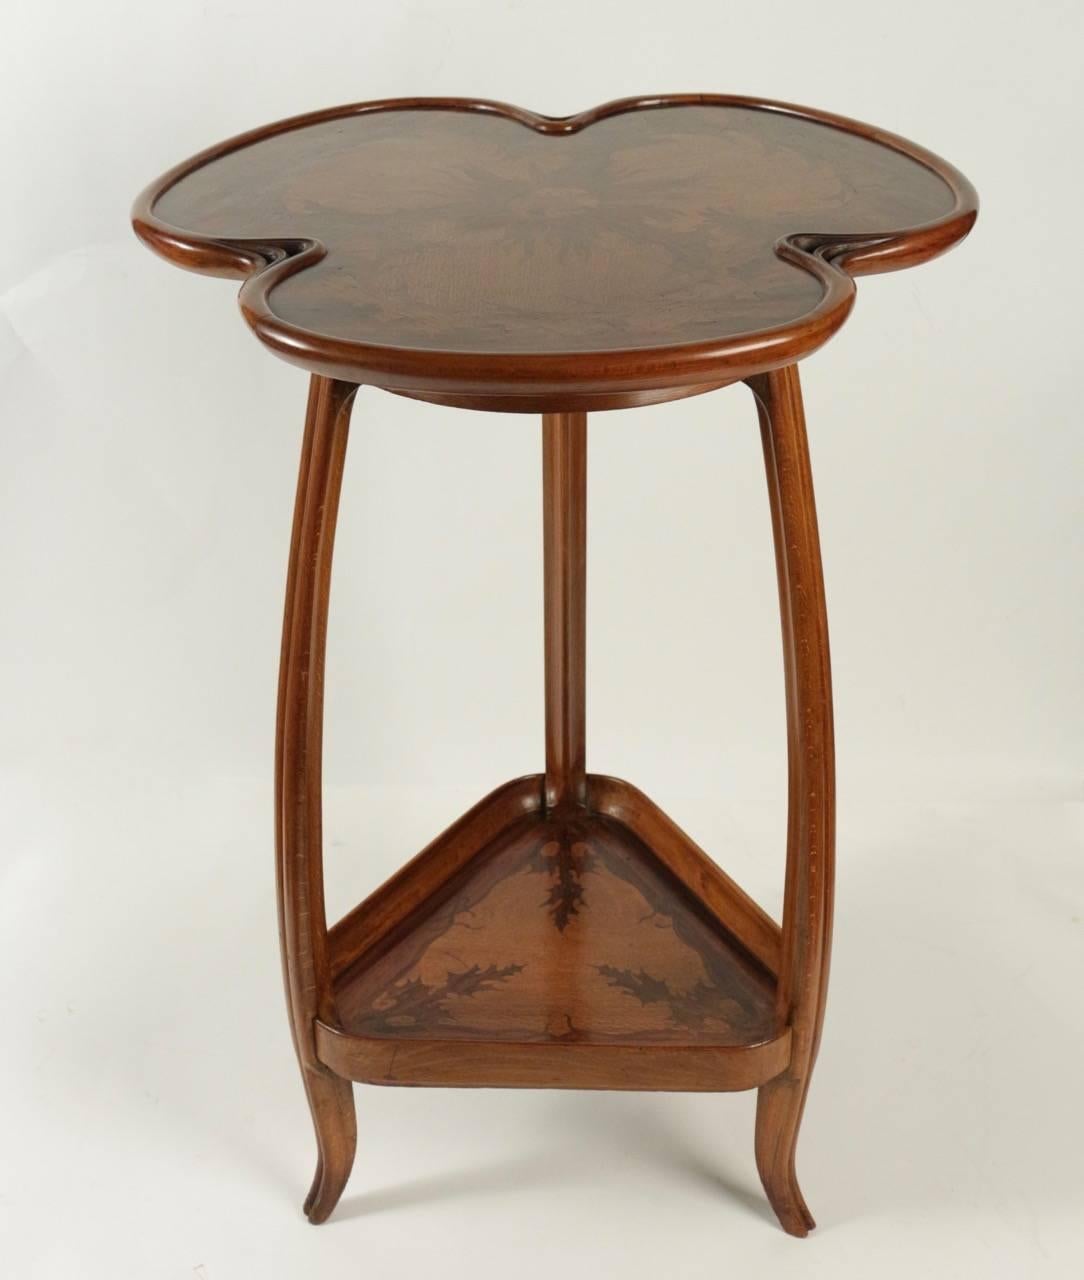 Walnut carved and marquetry gueridon by Louis Majorelle, circa 1900.
Signed : L.Majorelle. 

Measures: H 76cm x
W 52.5cm.

Litterature: Majorelle by Alastair Duncan, p.204.
 